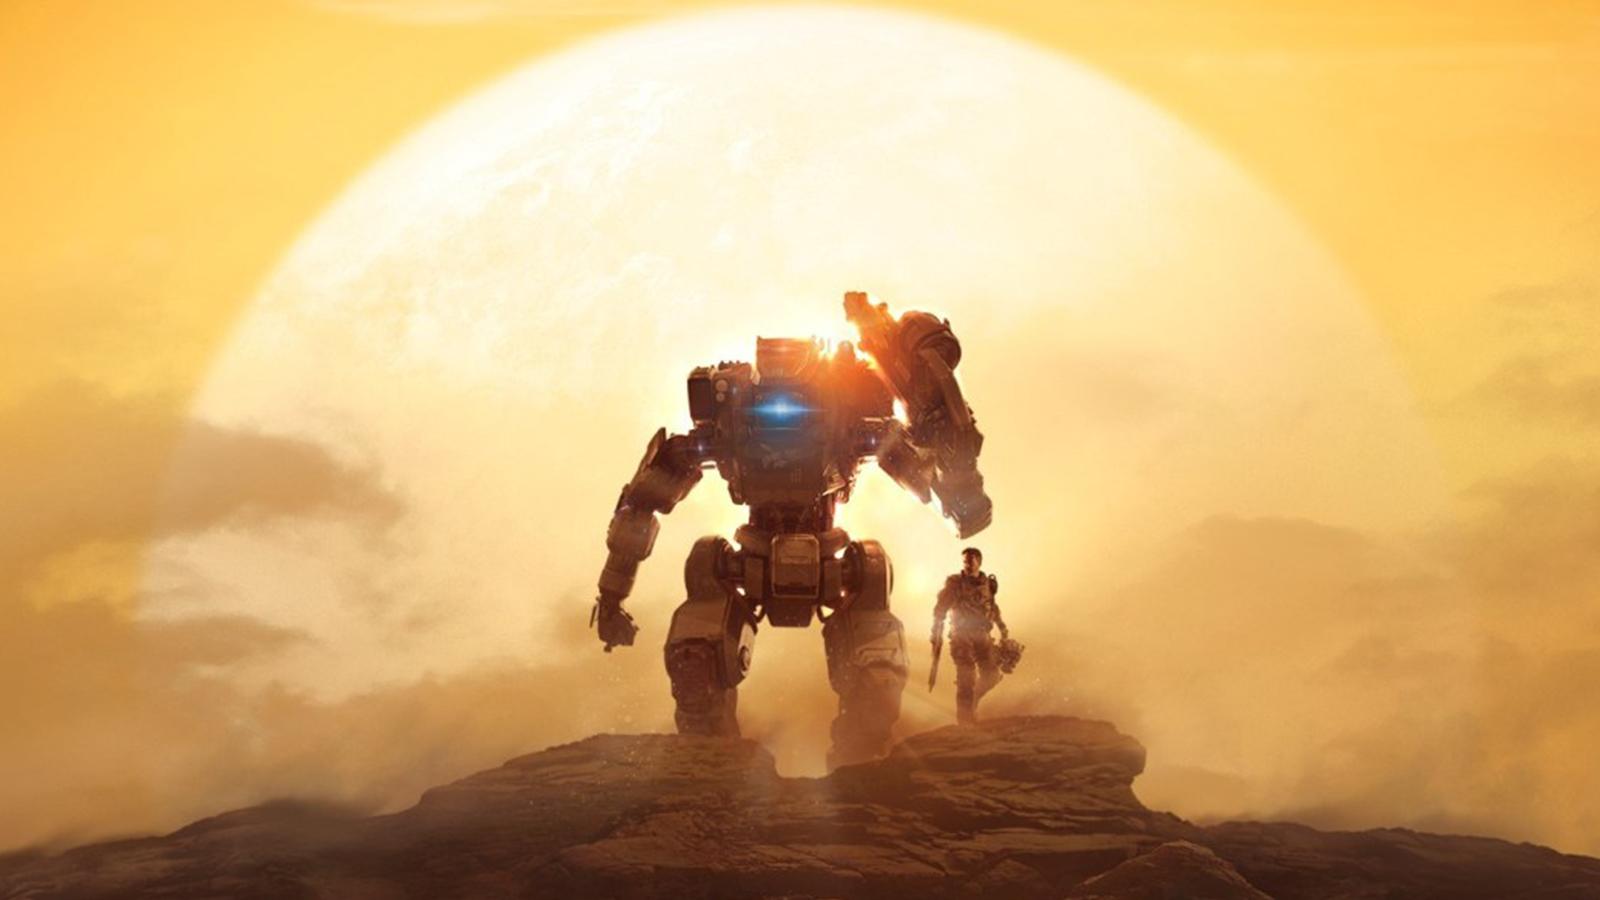 Titanfall 2 Steam Release is Reviving Its Online Multiplayer Community